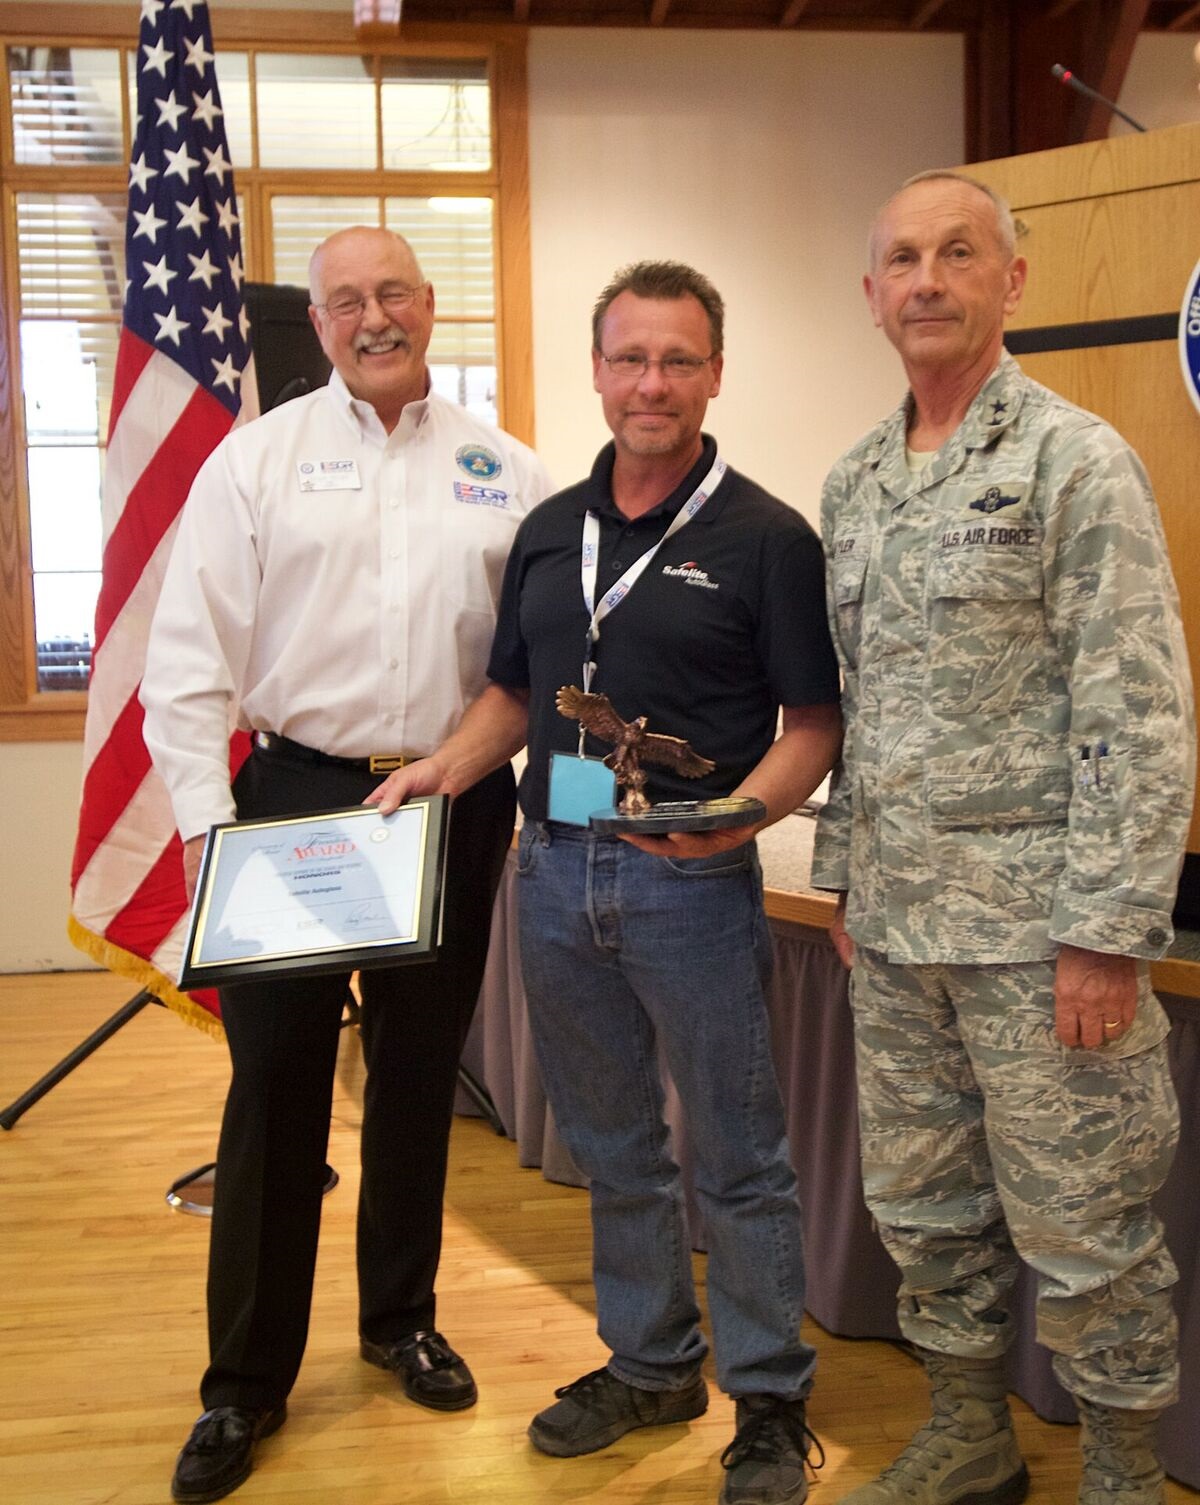 Safelite receives military honors